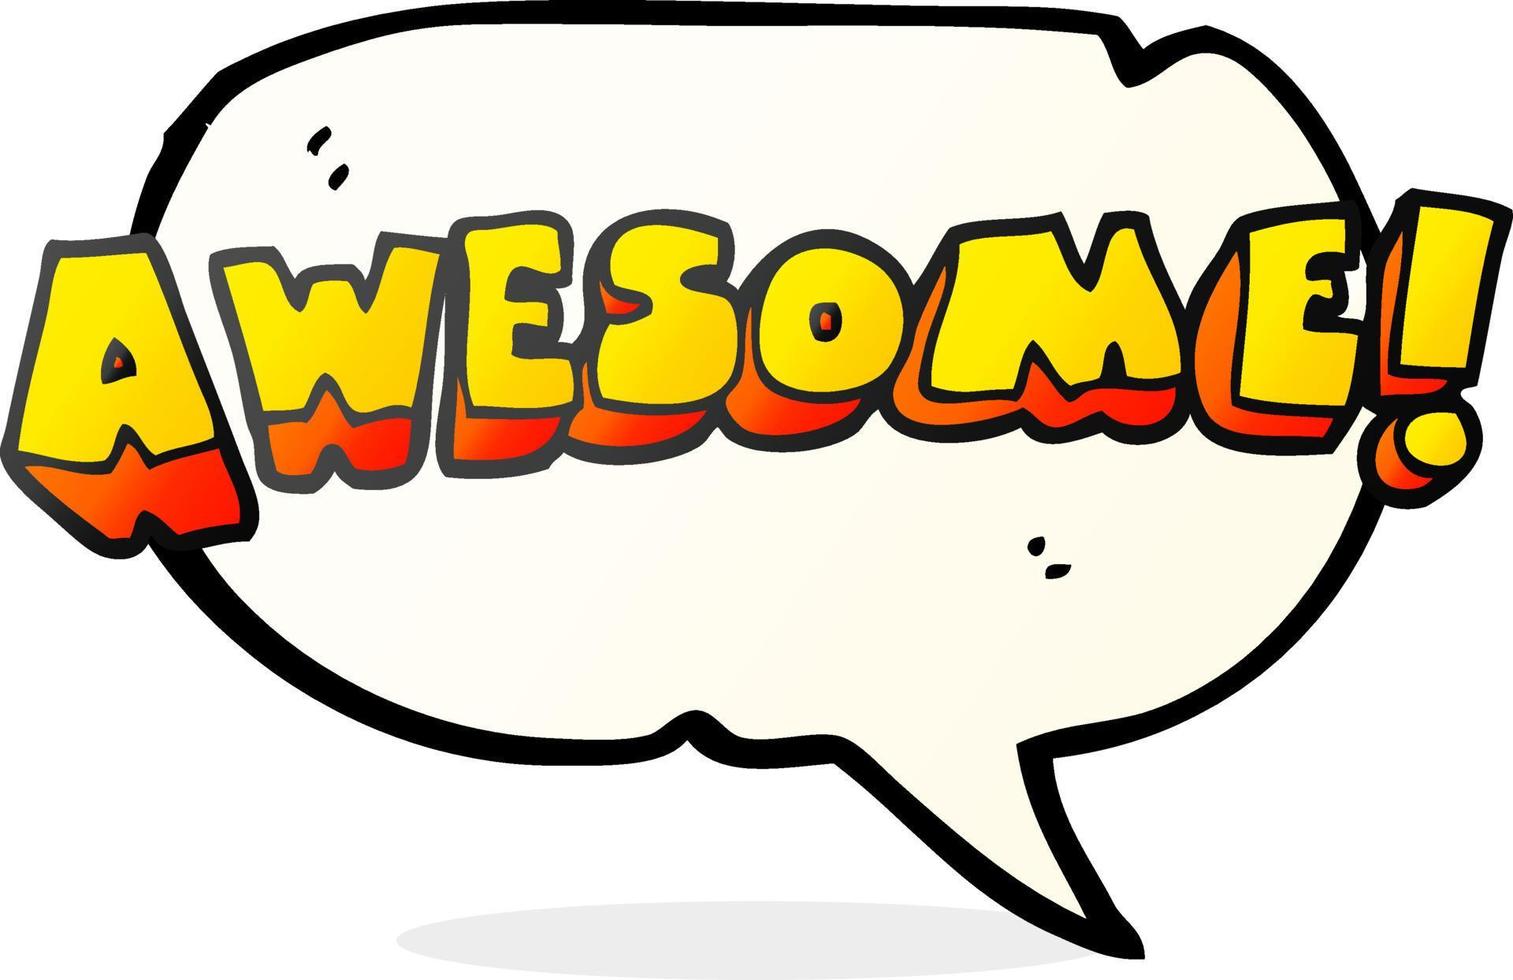 freehand drawn speech bubble cartoon awesome word vector